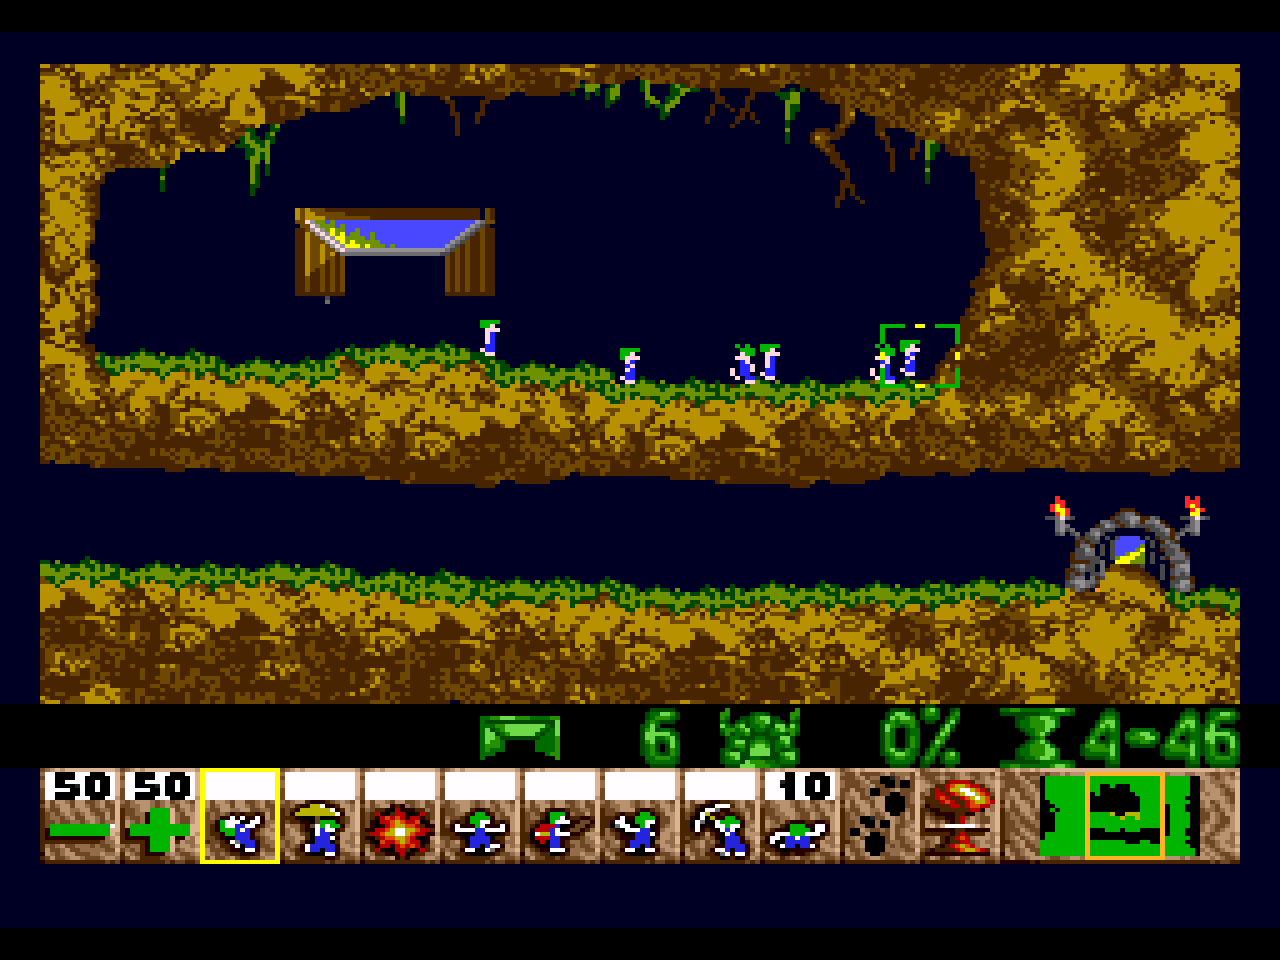 lemmings jumping off cliffs game